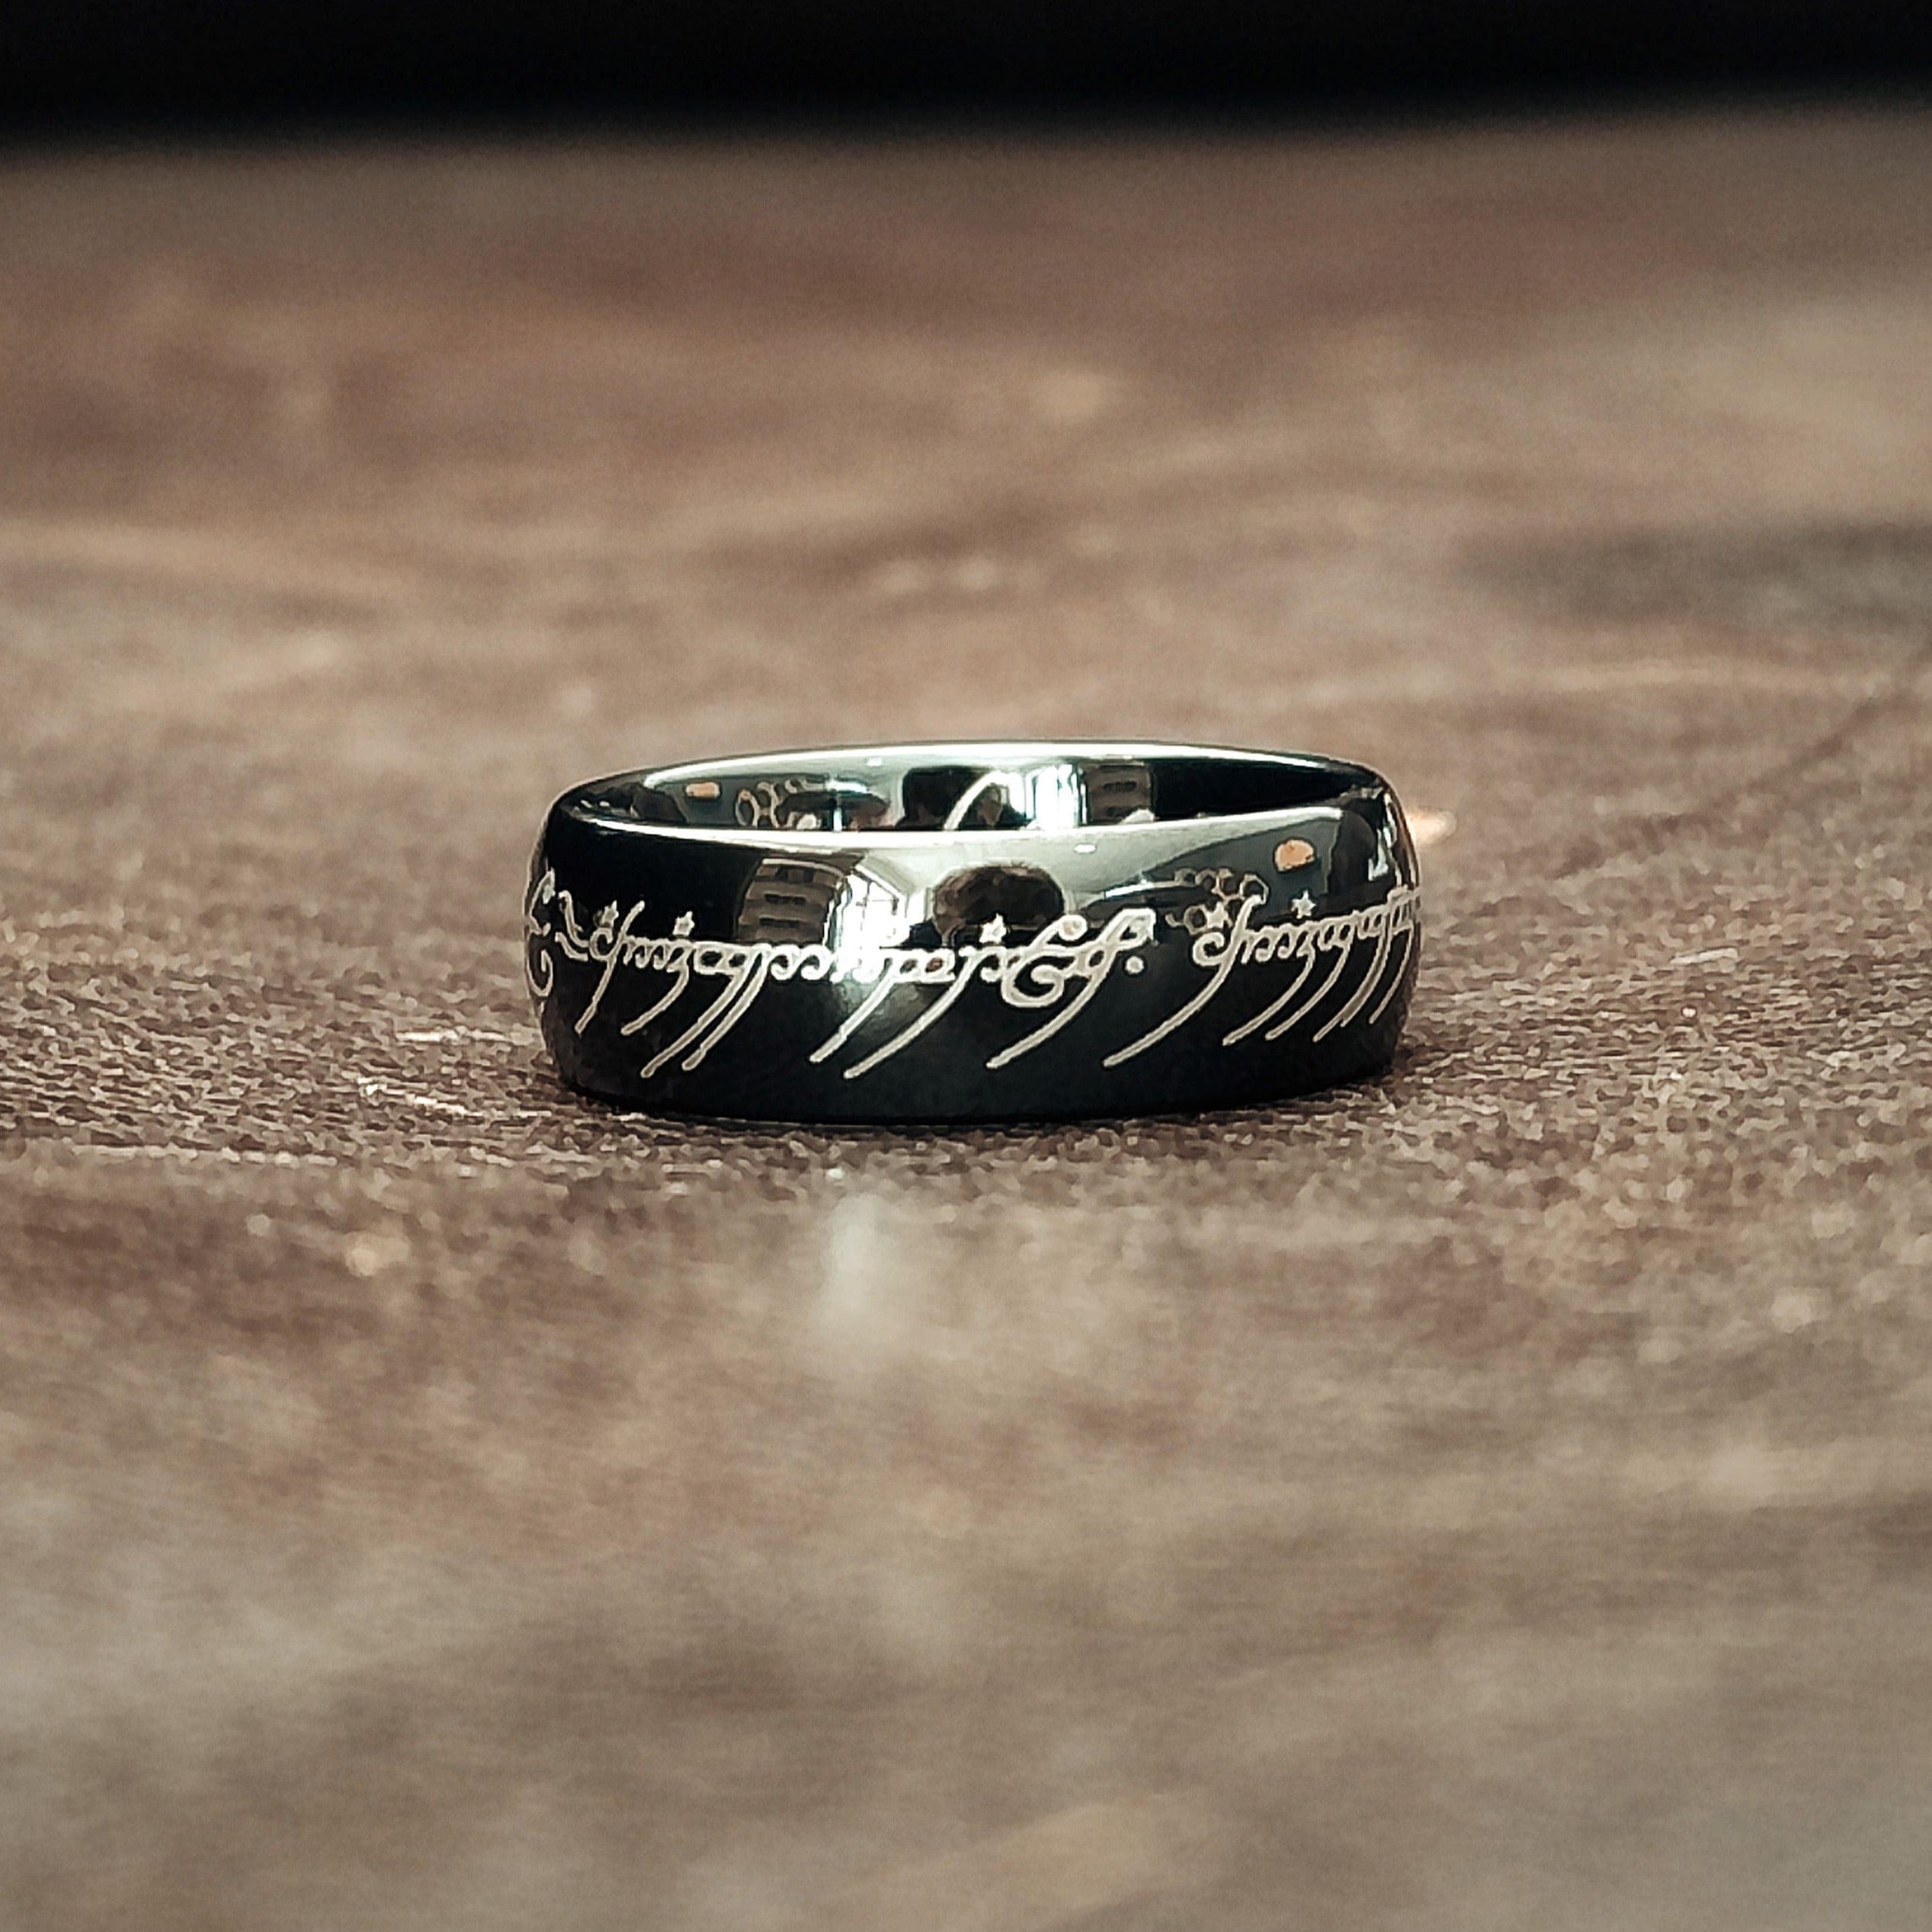 Unisex Size 6-10 Lord of the Rings Aragorn's Tibetan Silver Ring, Christmas  Gift | eBay